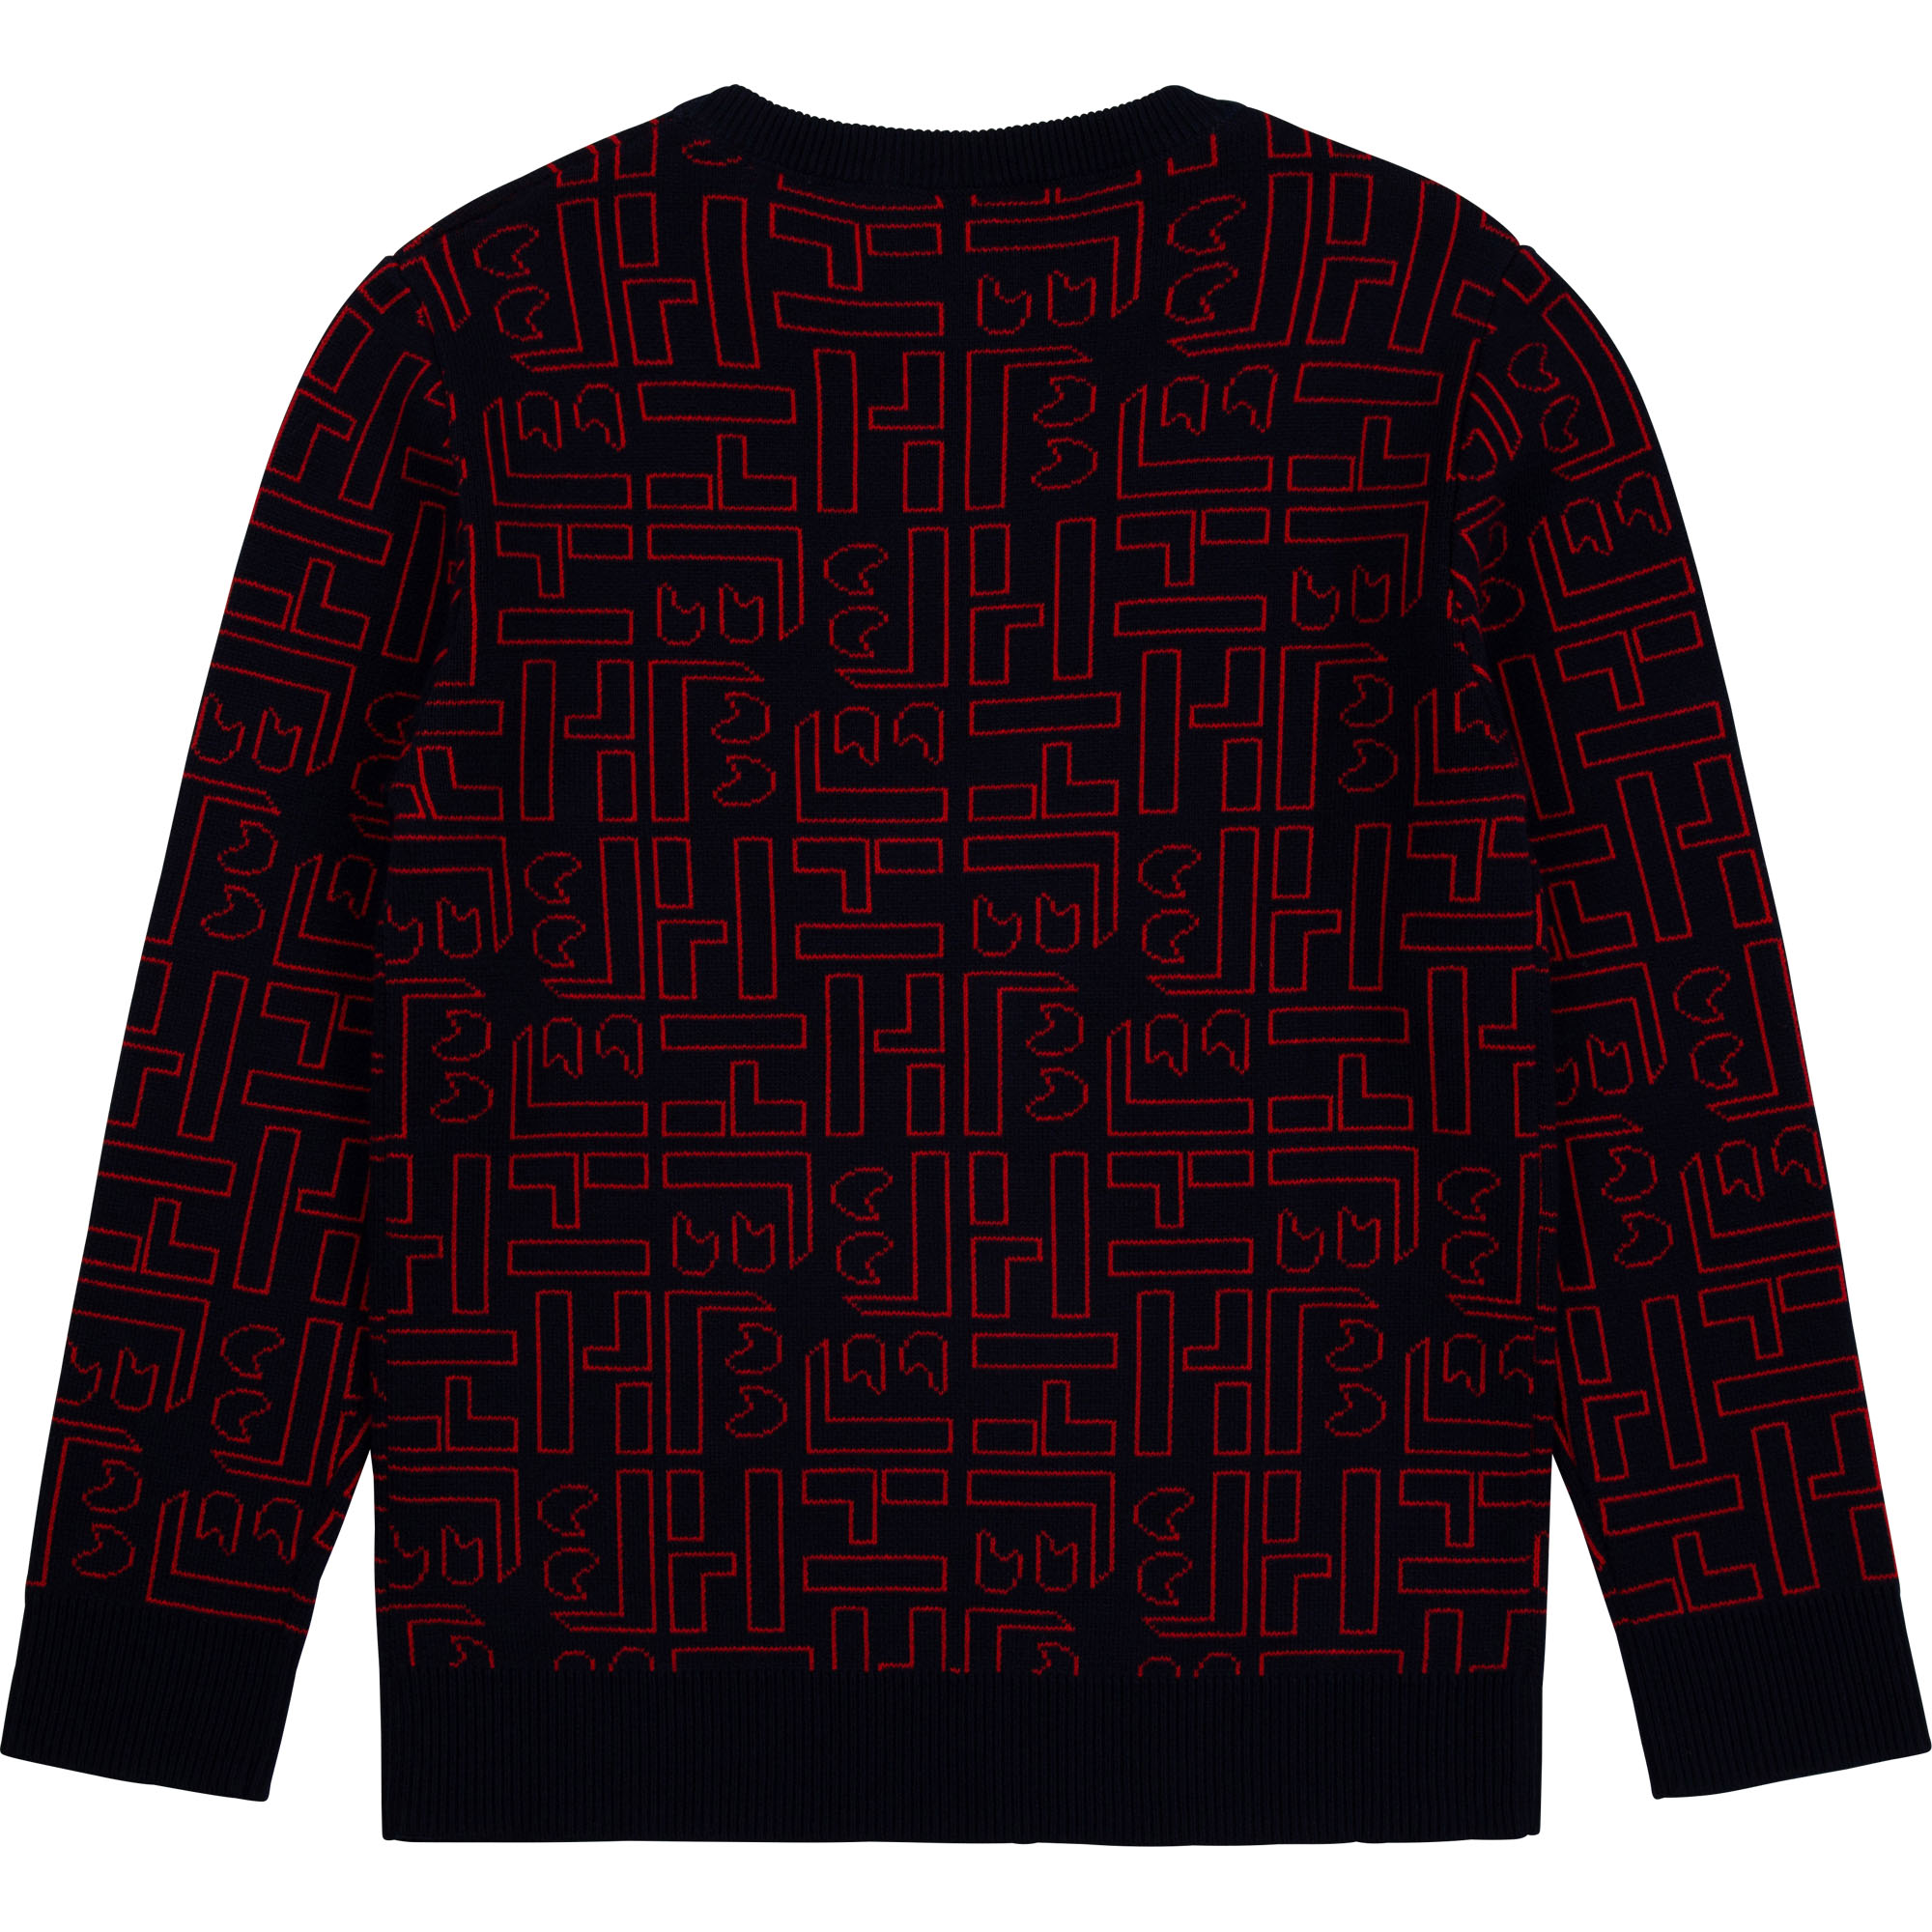 Jacquard tricot sweater BOSS for BOY